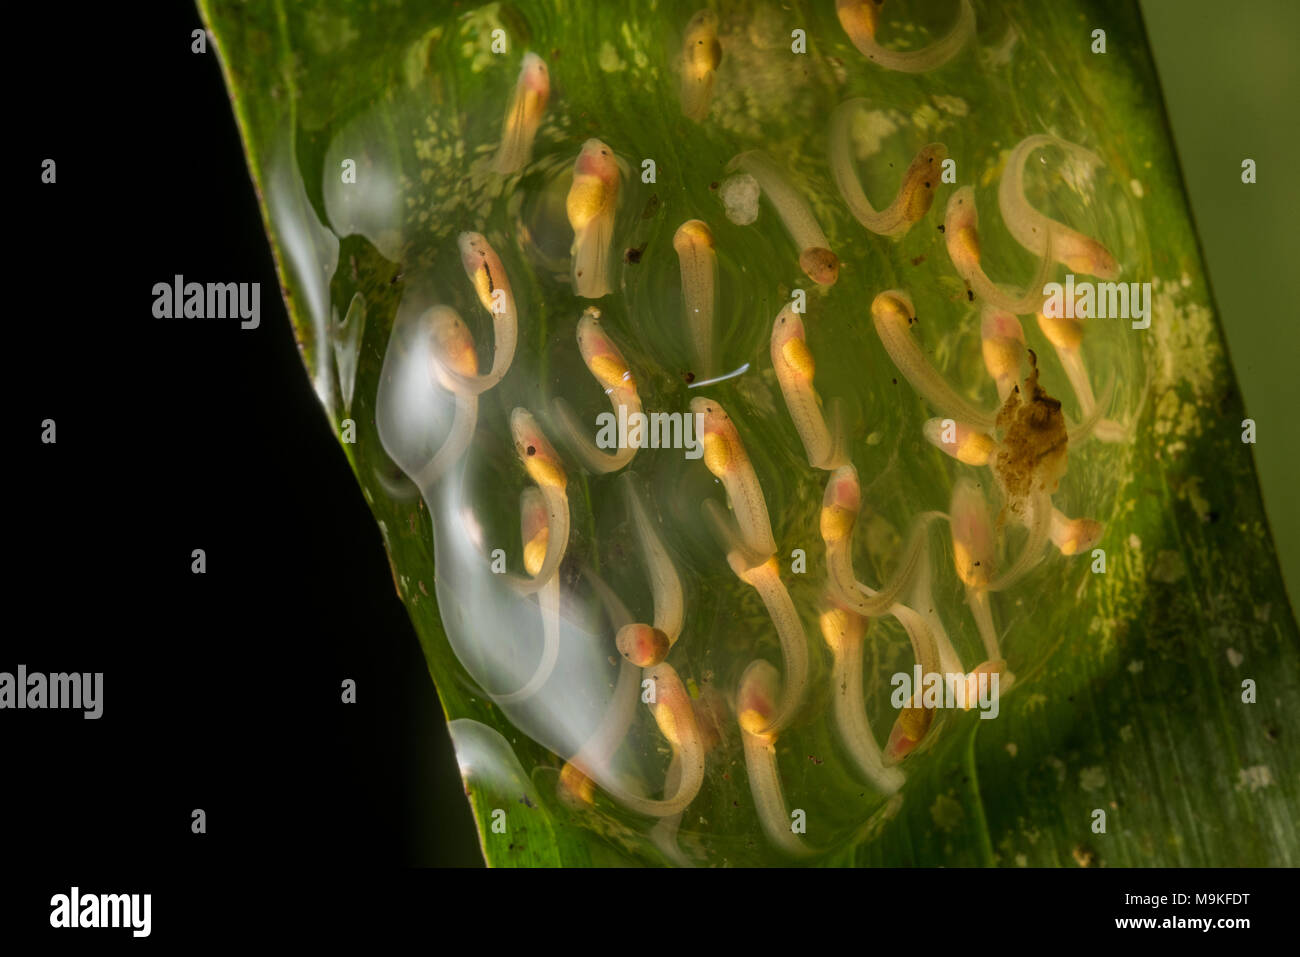 Overhanging a stream in Peru it is possible to find frogs' egg masses with tadpoles developing.  This egg mass belongs to a glassfrog (Centrolenidae). Stock Photo